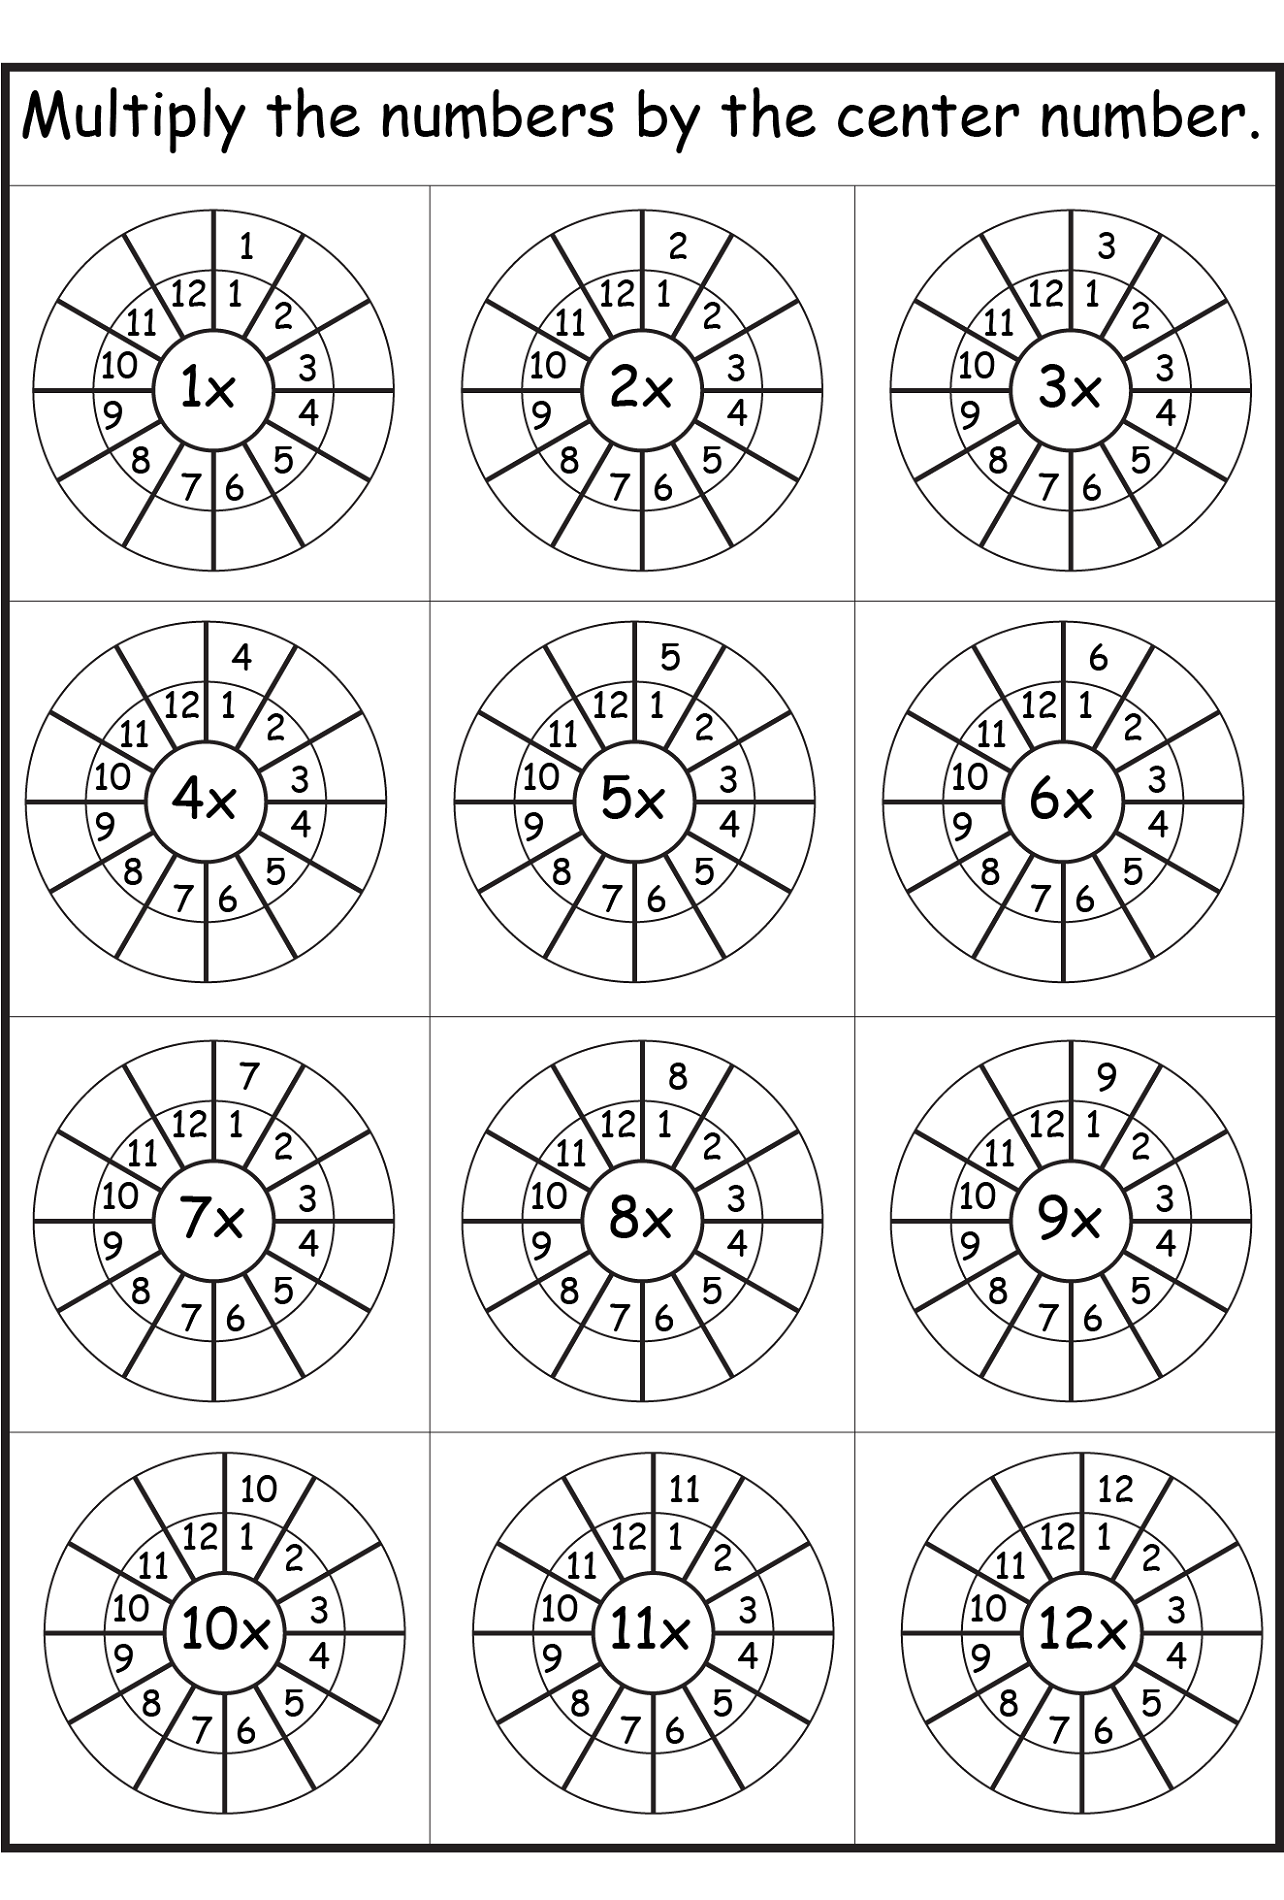 1 times tables worksheet to learn